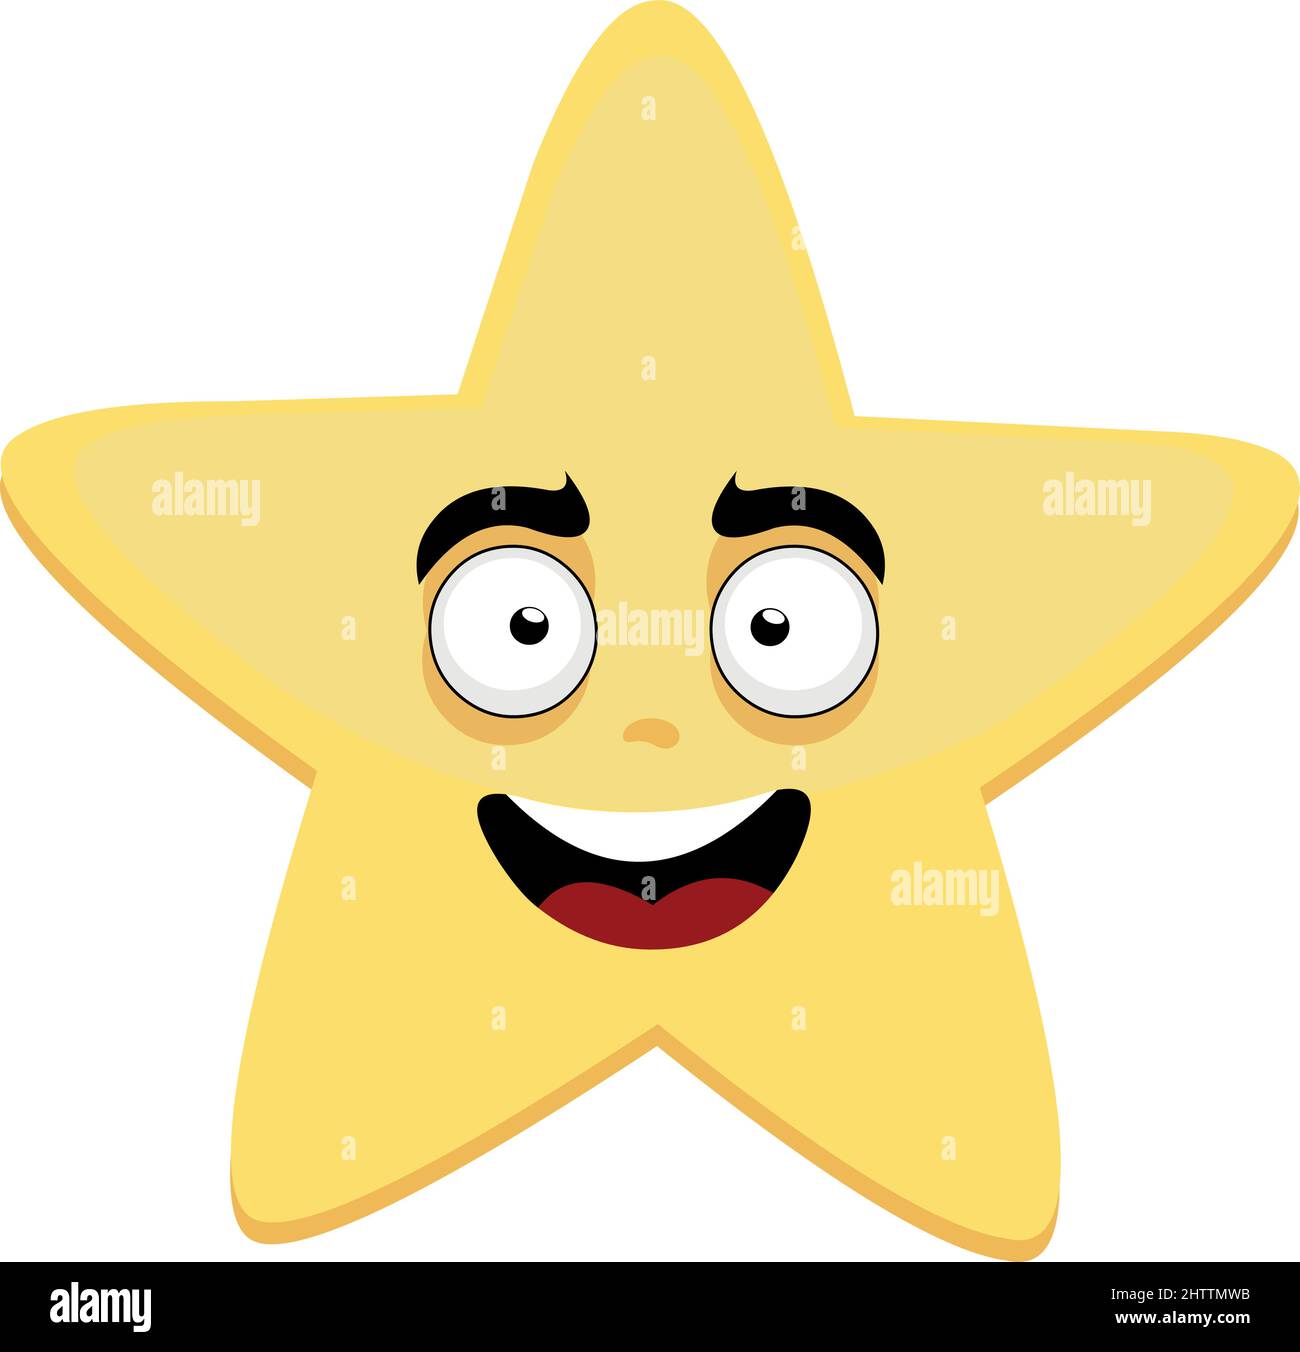 Vector cartoon star character illustration with a cheerful and smiling expression Stock Vector